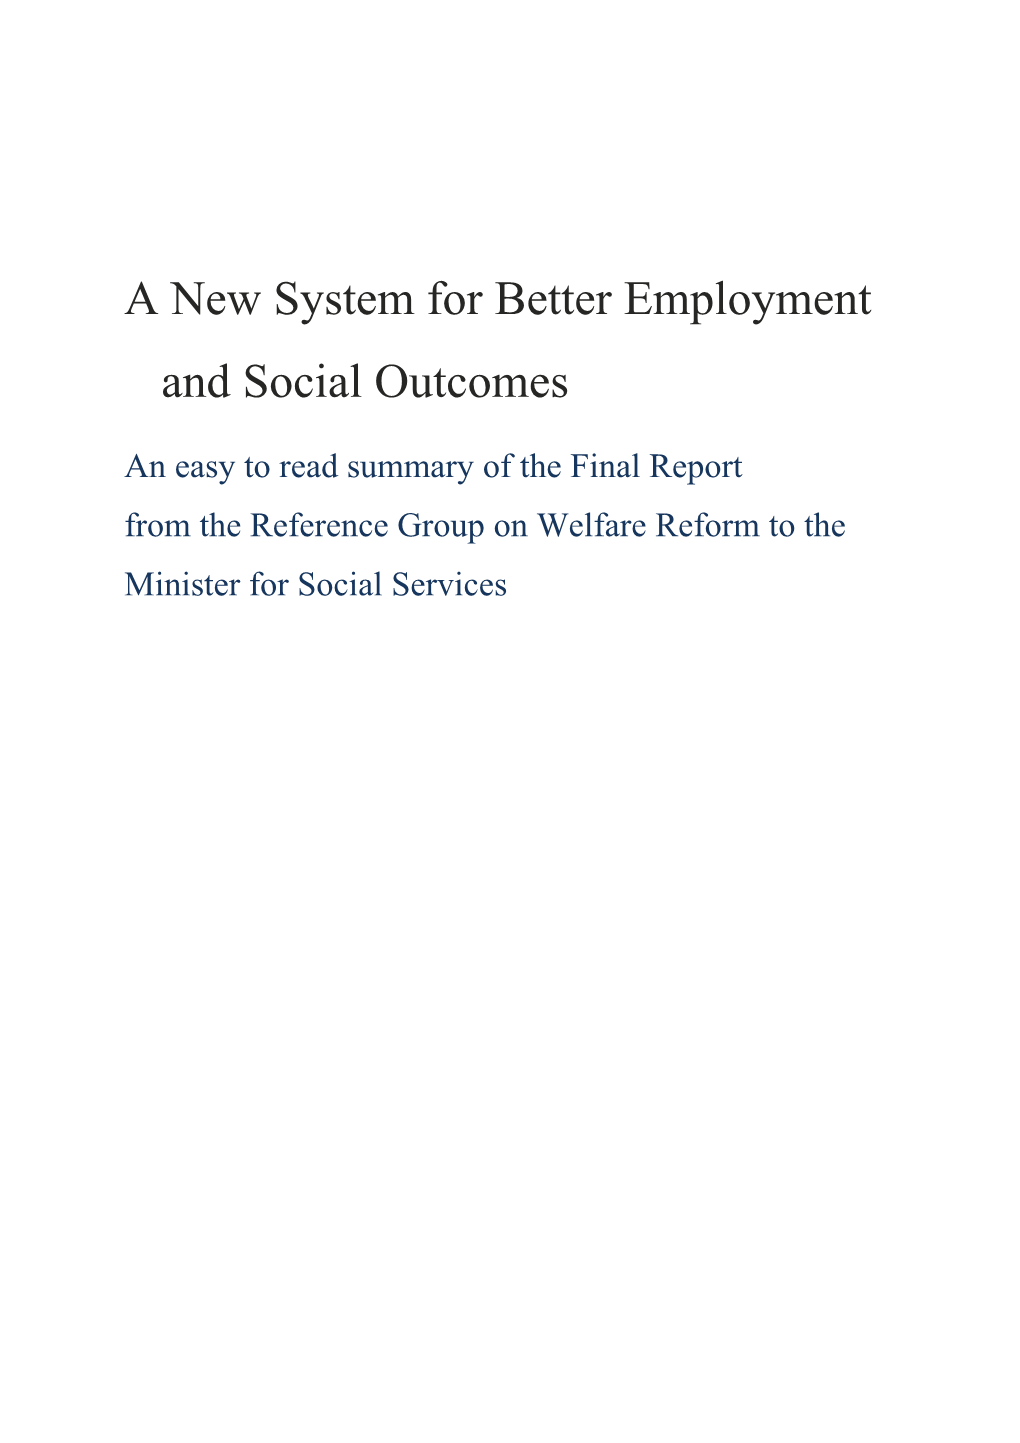 A New System for Better Employment and Social Outcomes